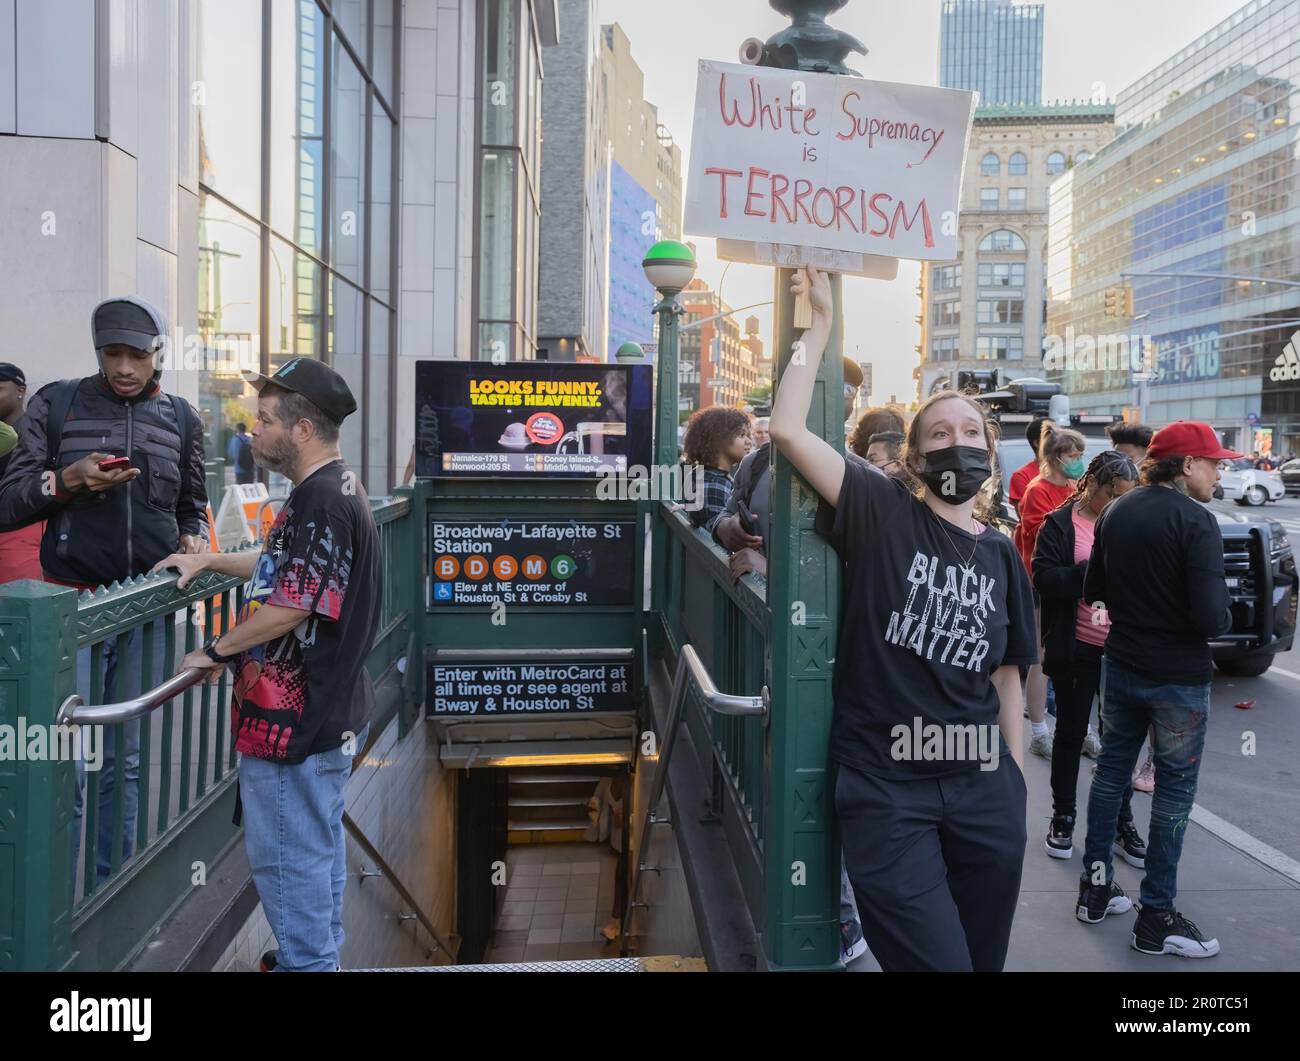 NEW YORK, N.Y. – May 8, 2023: People are seen outside the Broadway-Lafayette Street subway station prior to a vigil for Jordan Neely. Stock Photo